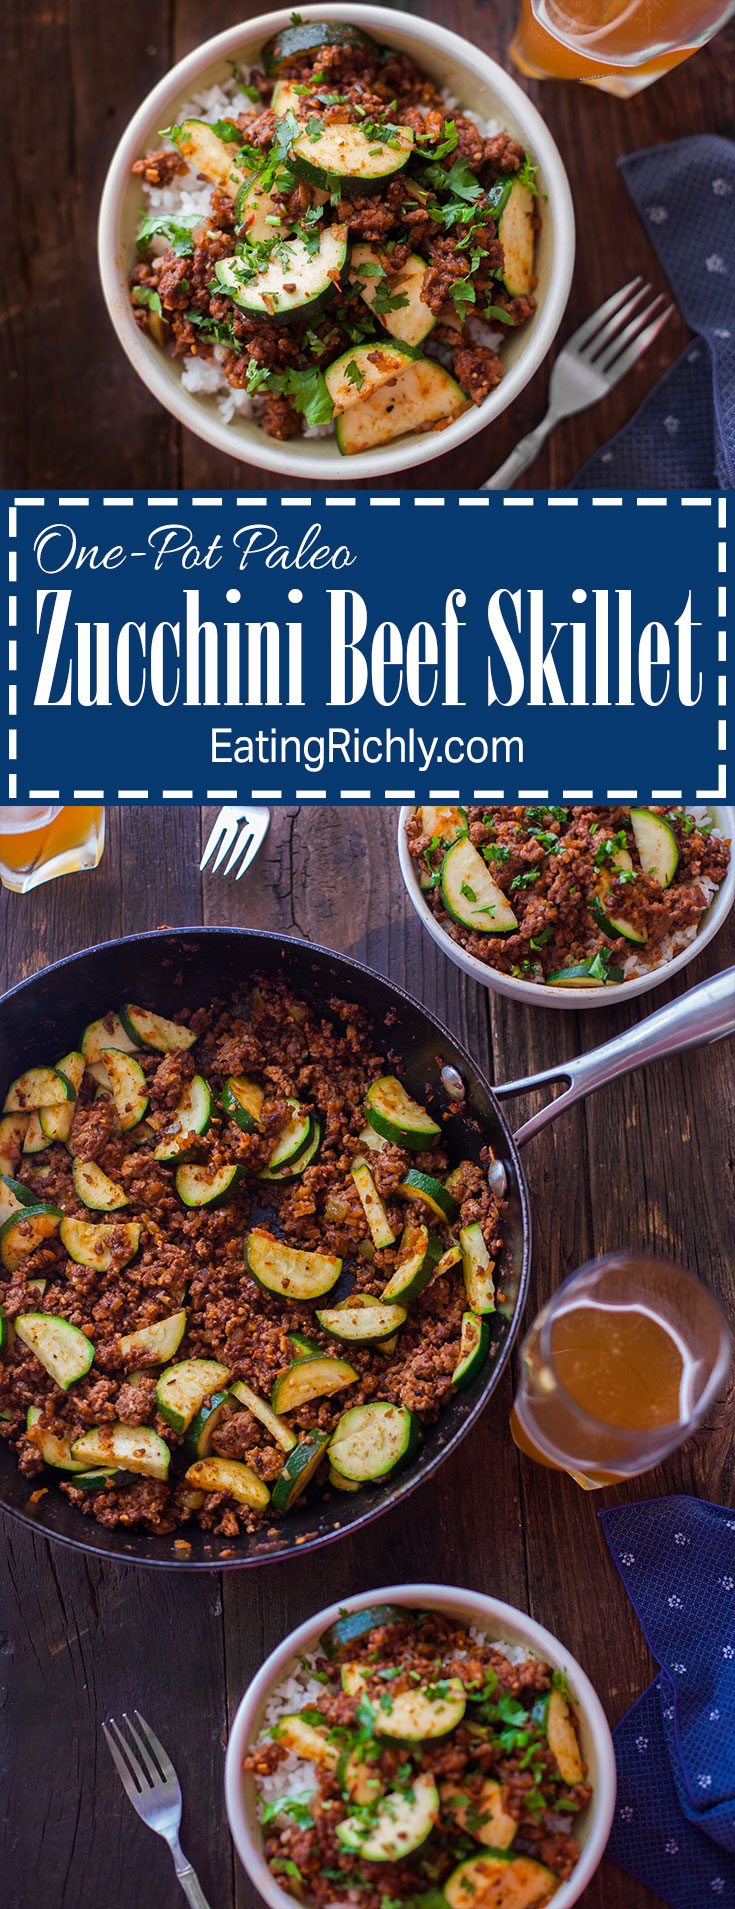 Need a quick easy paleo dinner? This one-pot zucchini beef skillet is ready in 30 minutes and can be eaten as is or over rice. Use up that garden zucchini! From EatingRichly.com